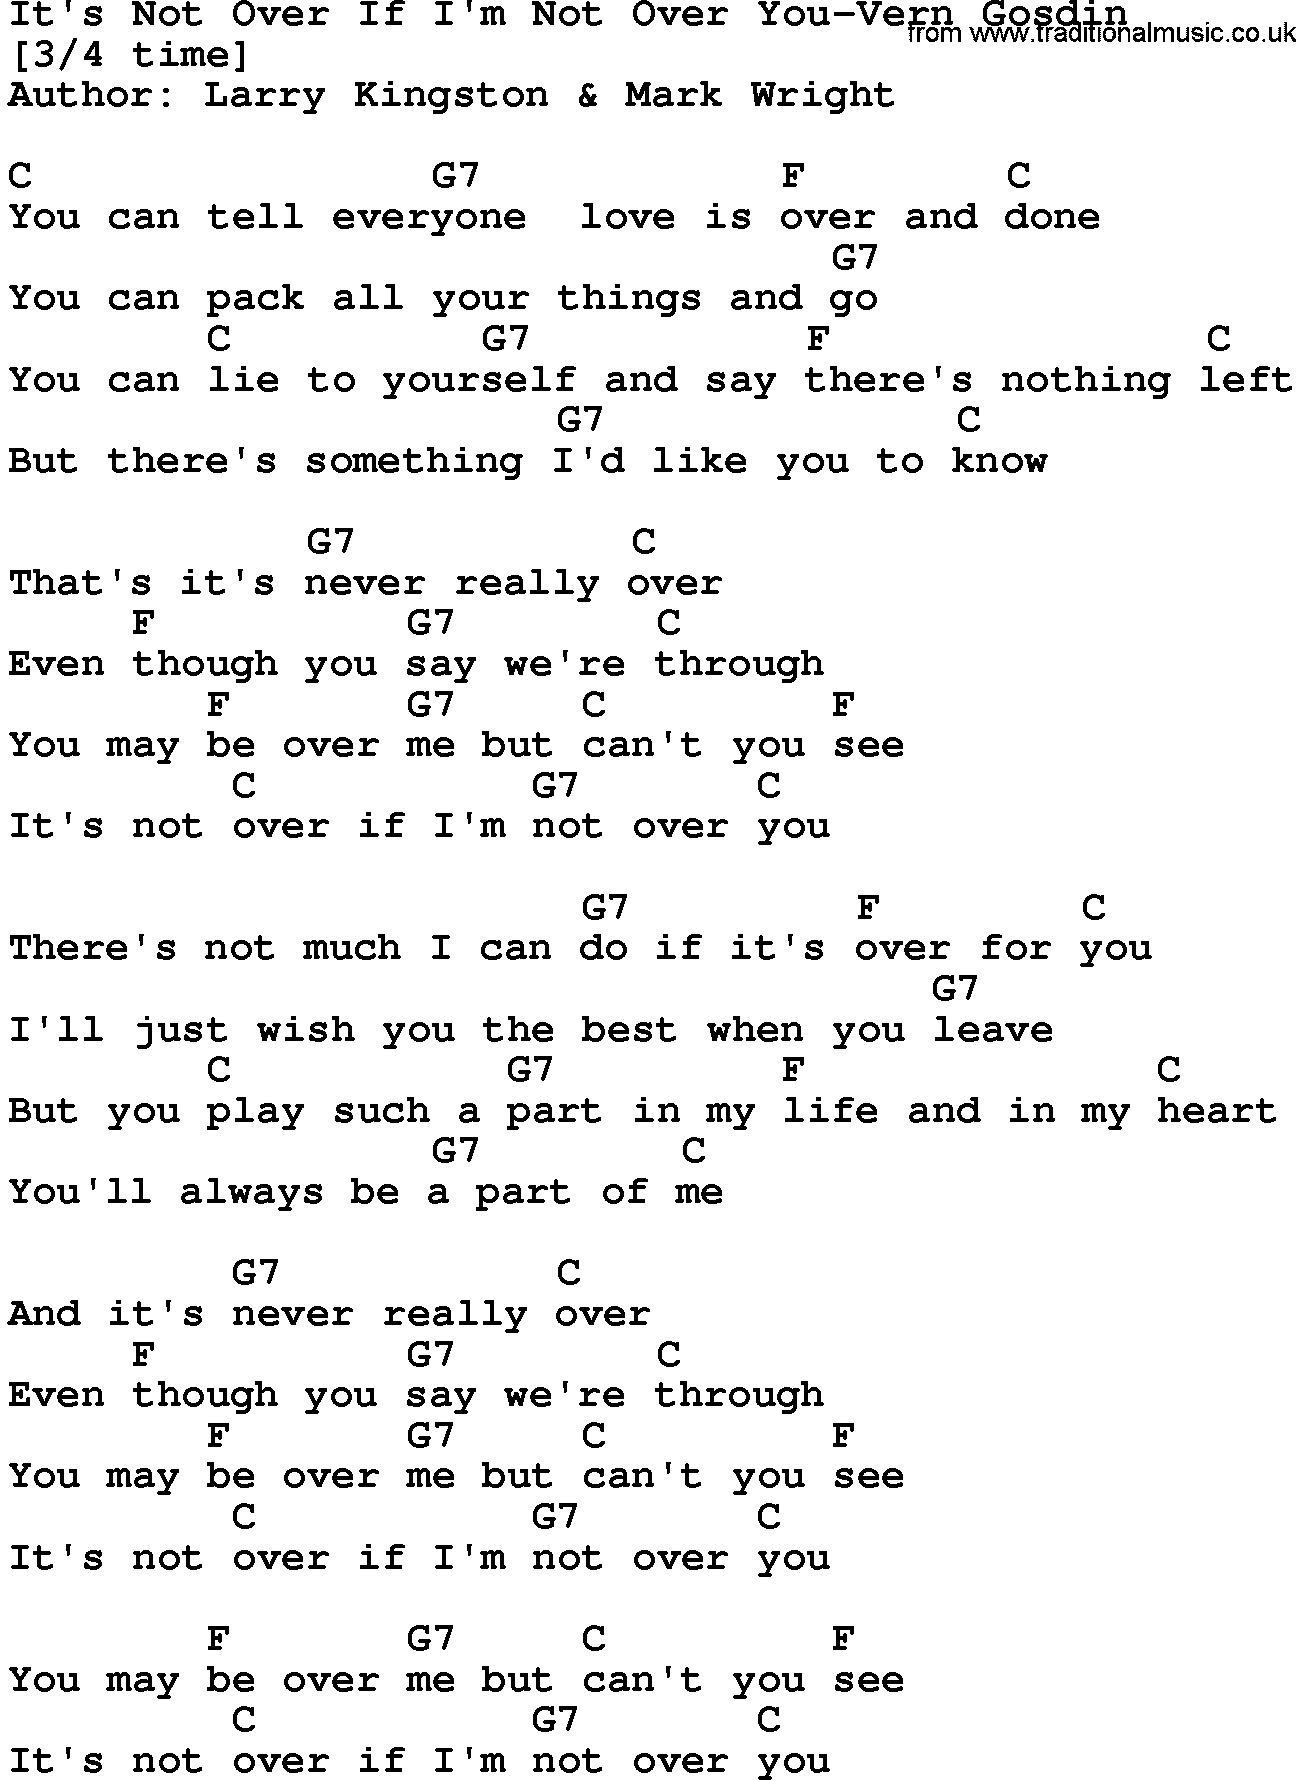 Country music song: It's Not Over If I'm Not Over You-Vern Gosdin lyrics and chords